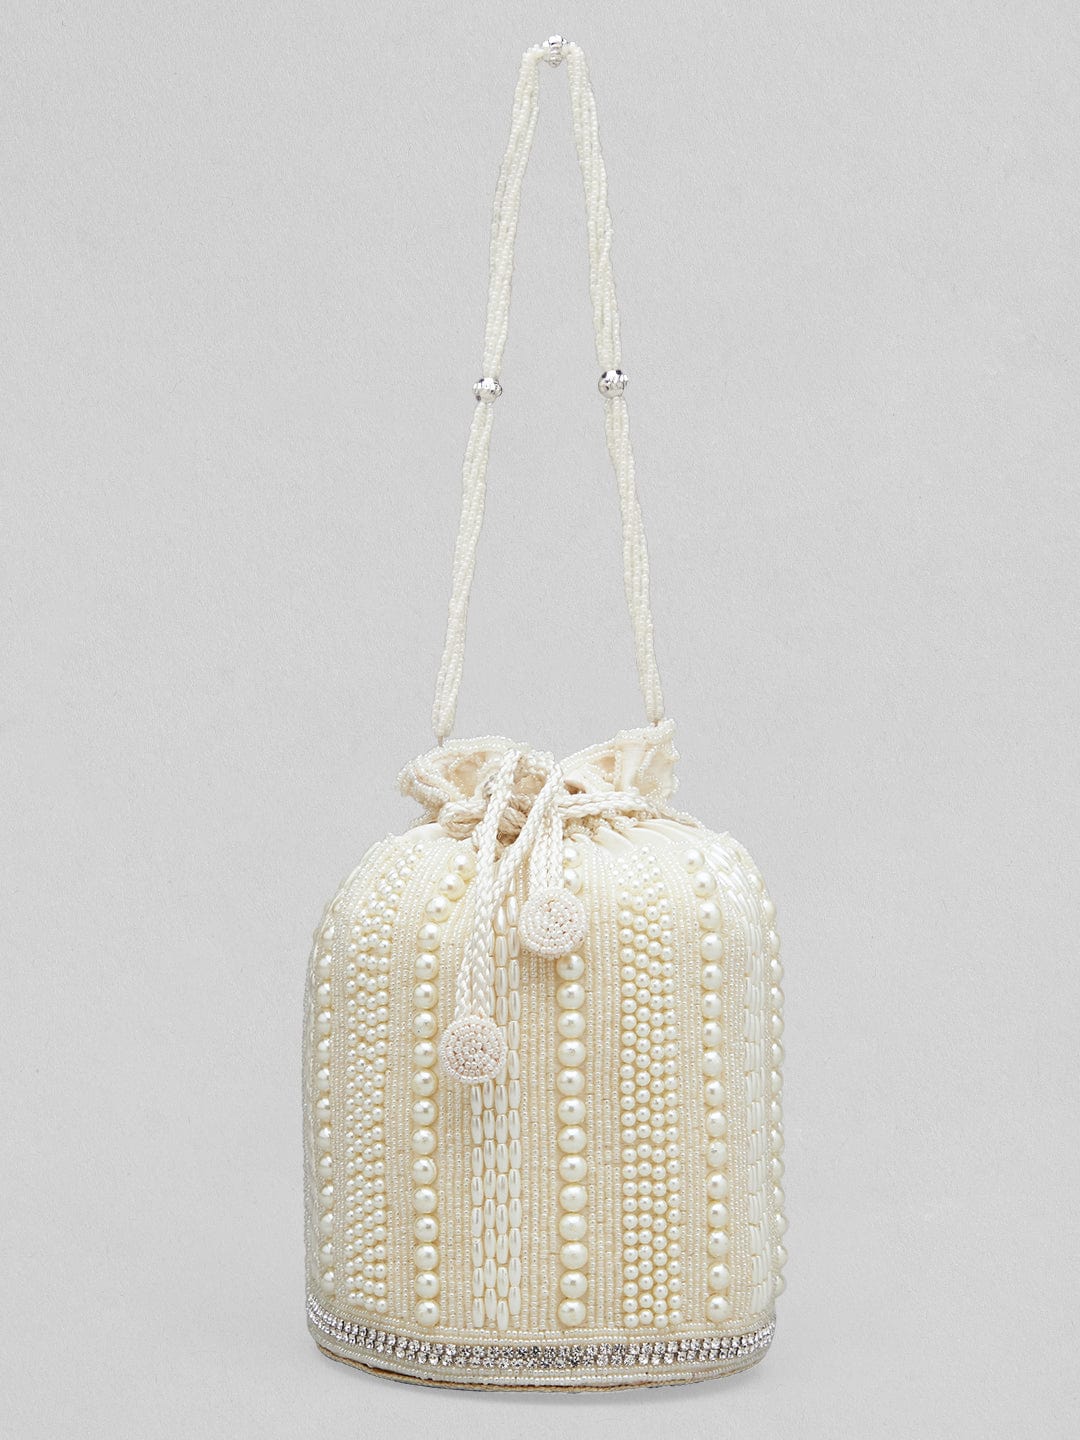 Rubans Off White Colour Potli Bag With Studded With Pearls Design. Handbag & Wallet Accessories